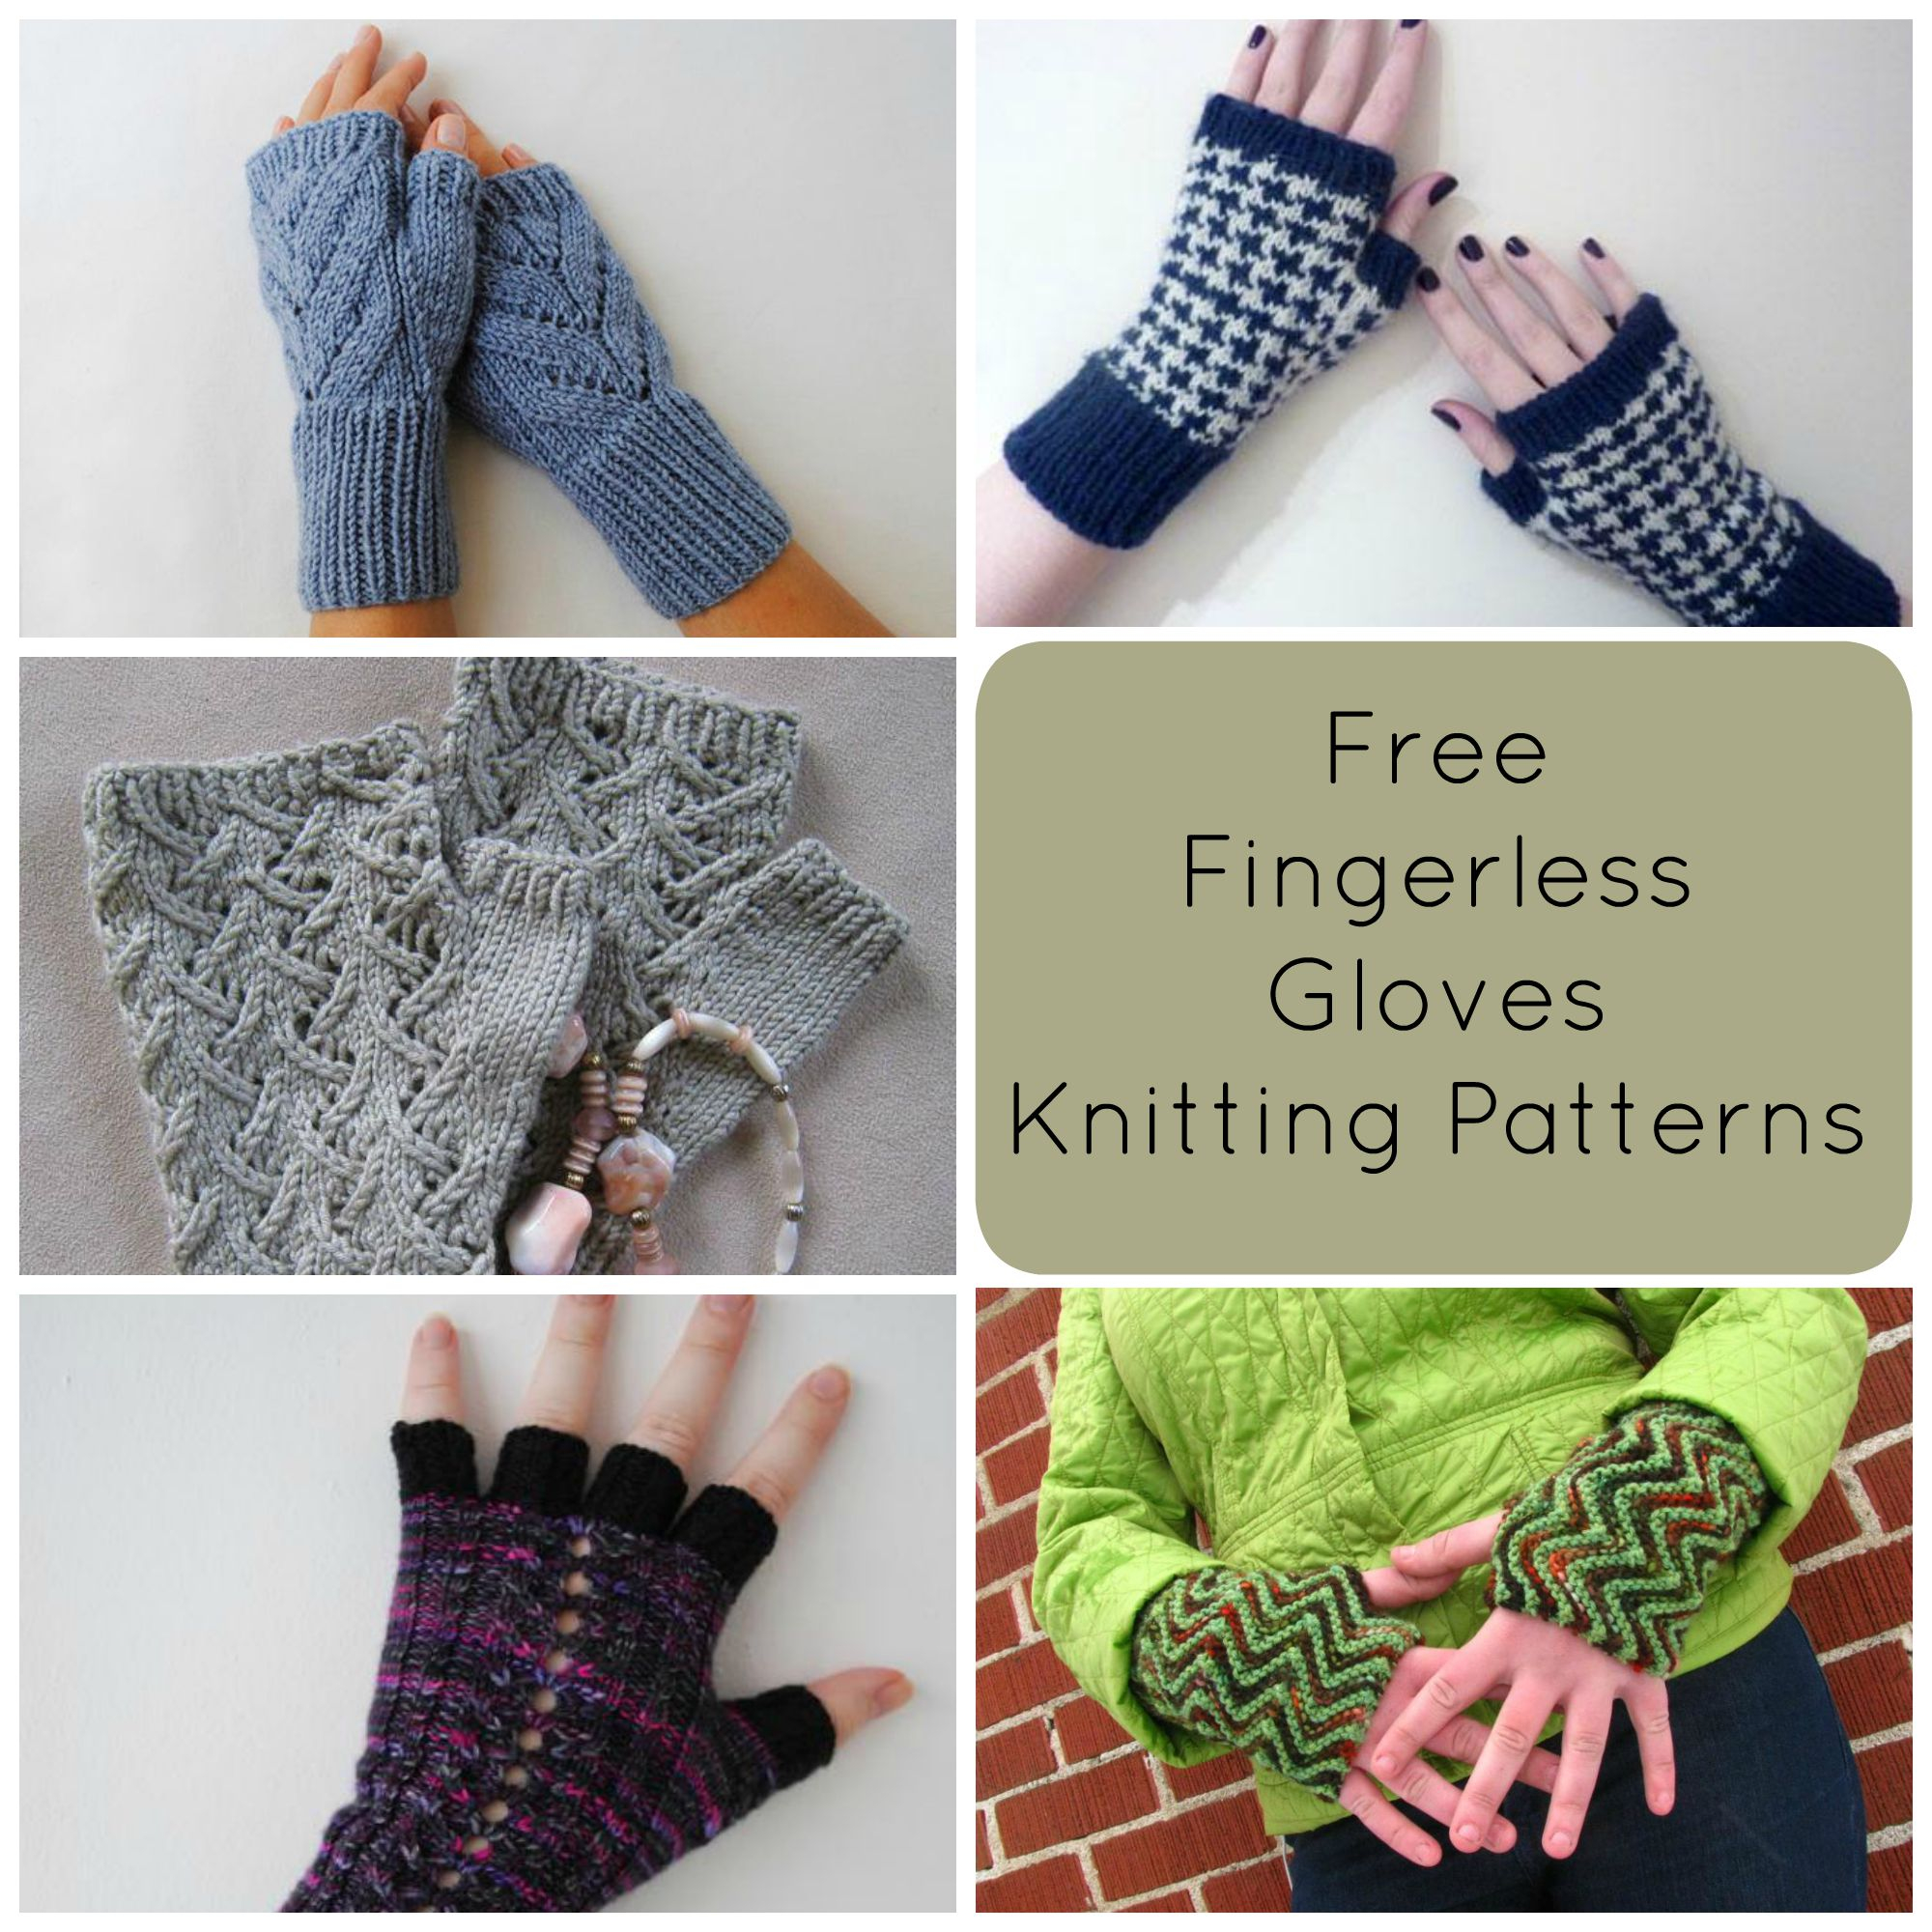 Free Knitted Glove Patterns Knitting For Beginners Craft Blog Crochet Patterns